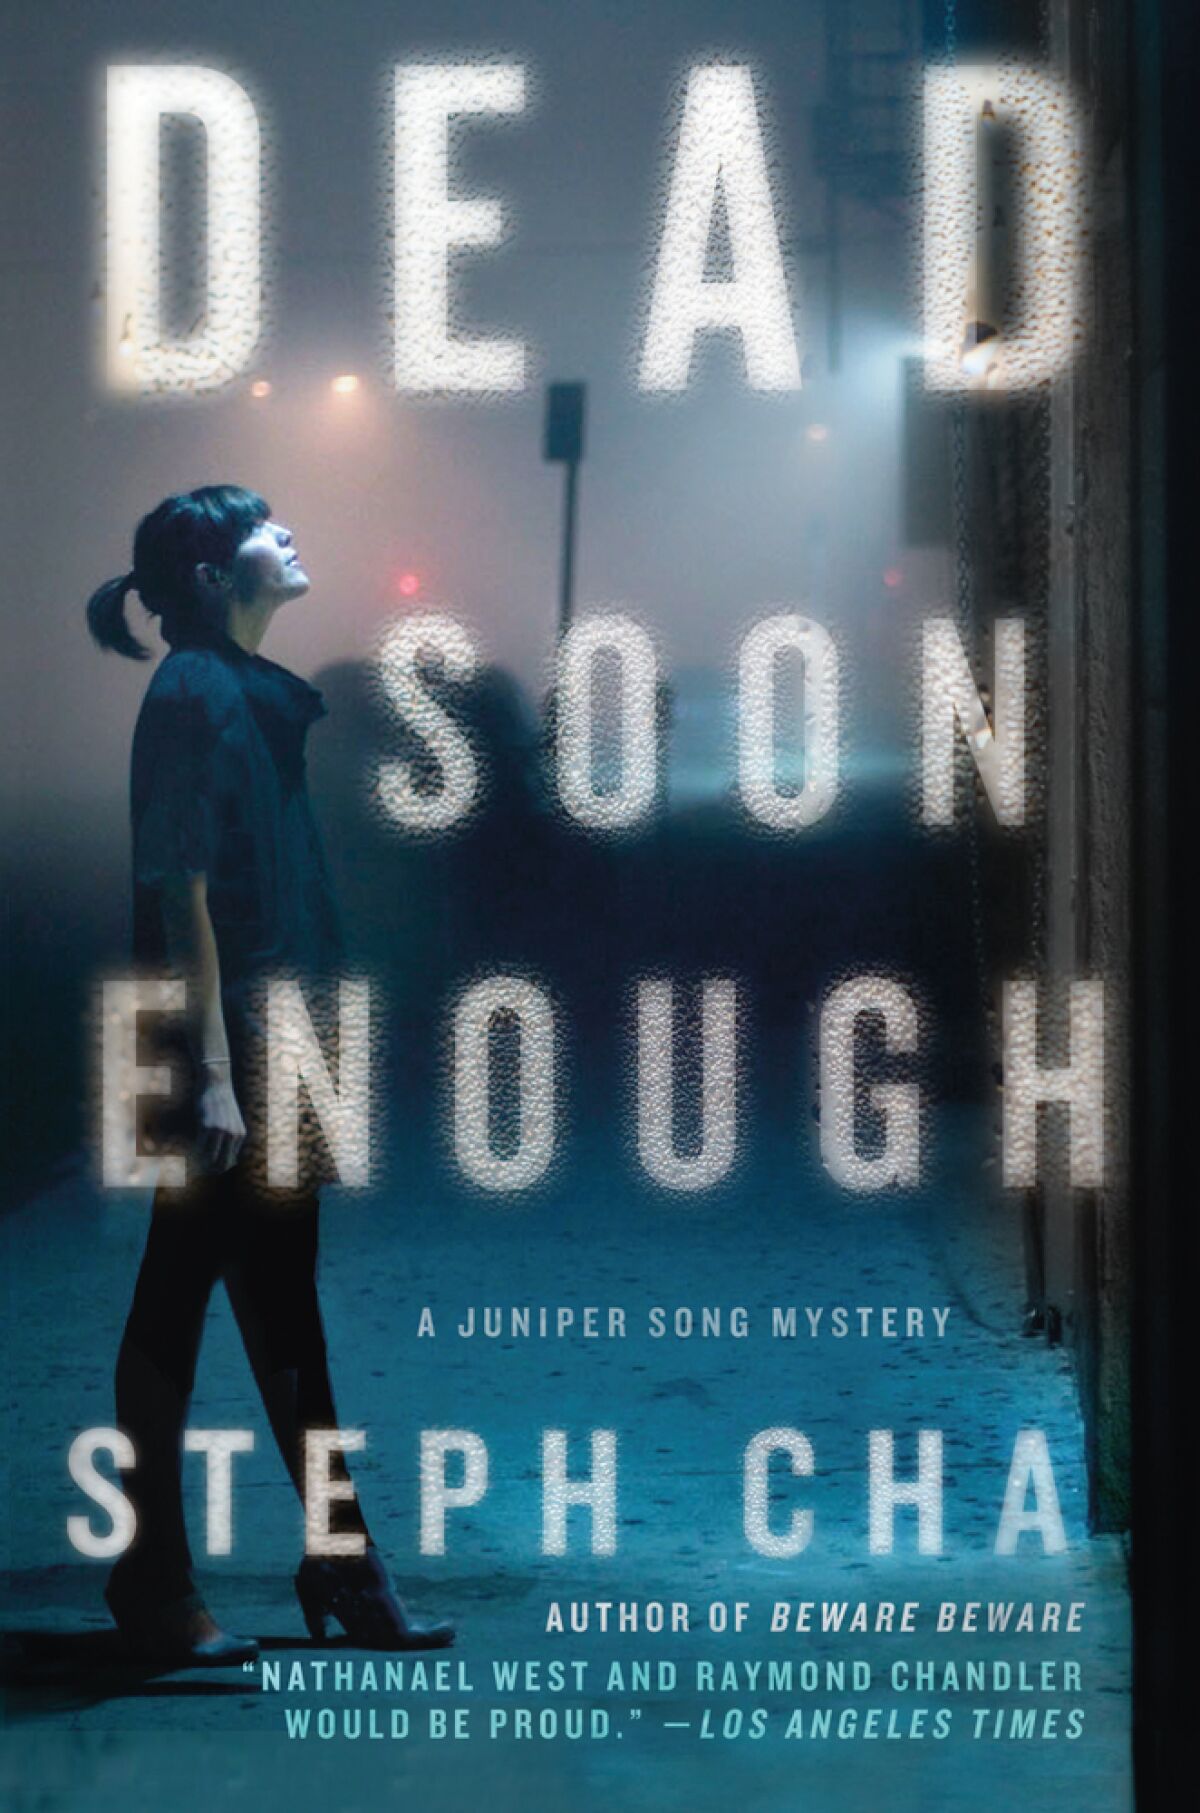 Book jacket for "Dead Soon Enough: A Juniper Song Mystery (Juniper Song Mysteries)" by Steph Cha.